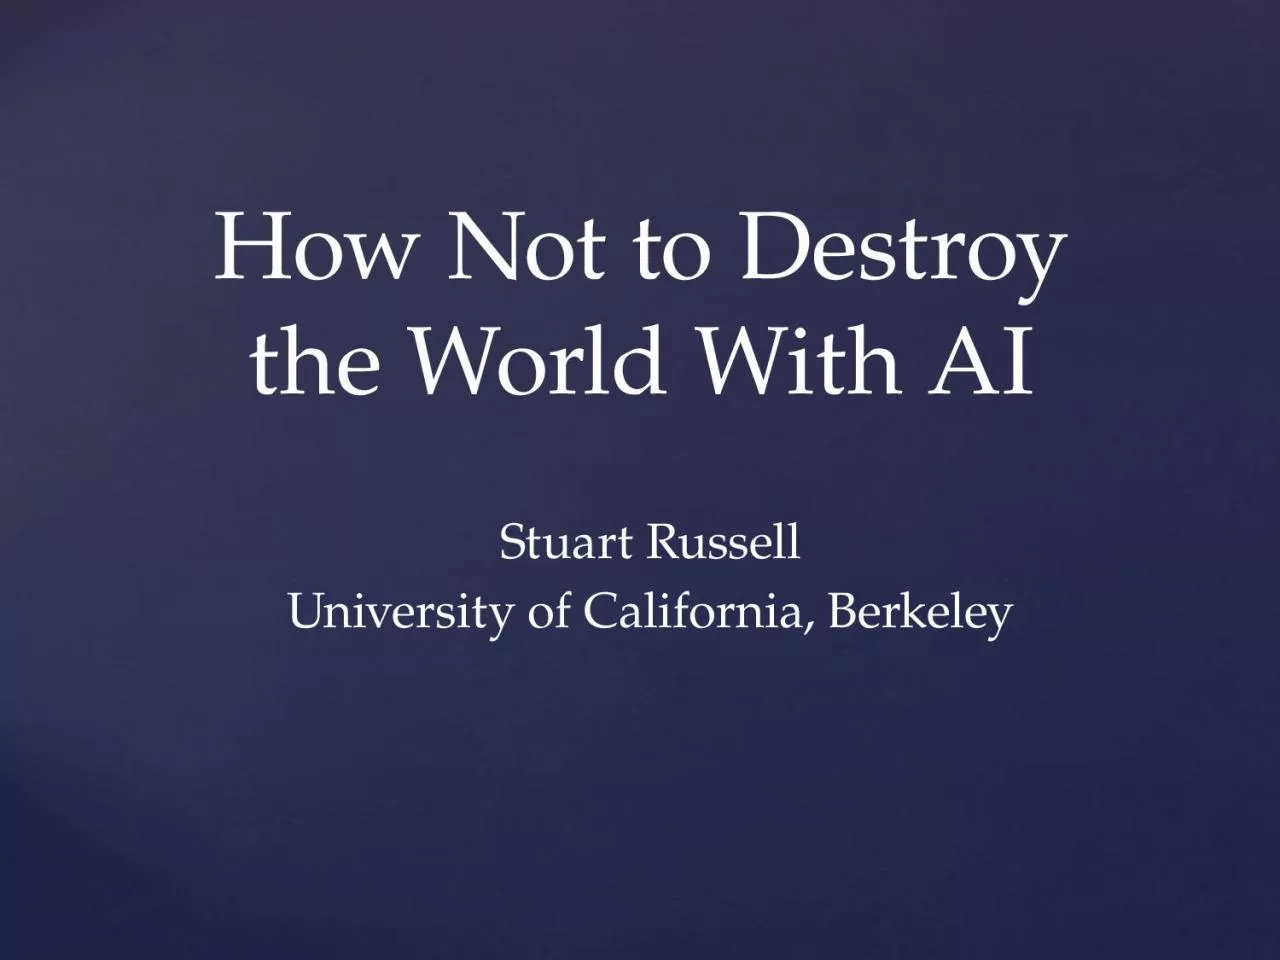 How Not to Destroy the World With AI